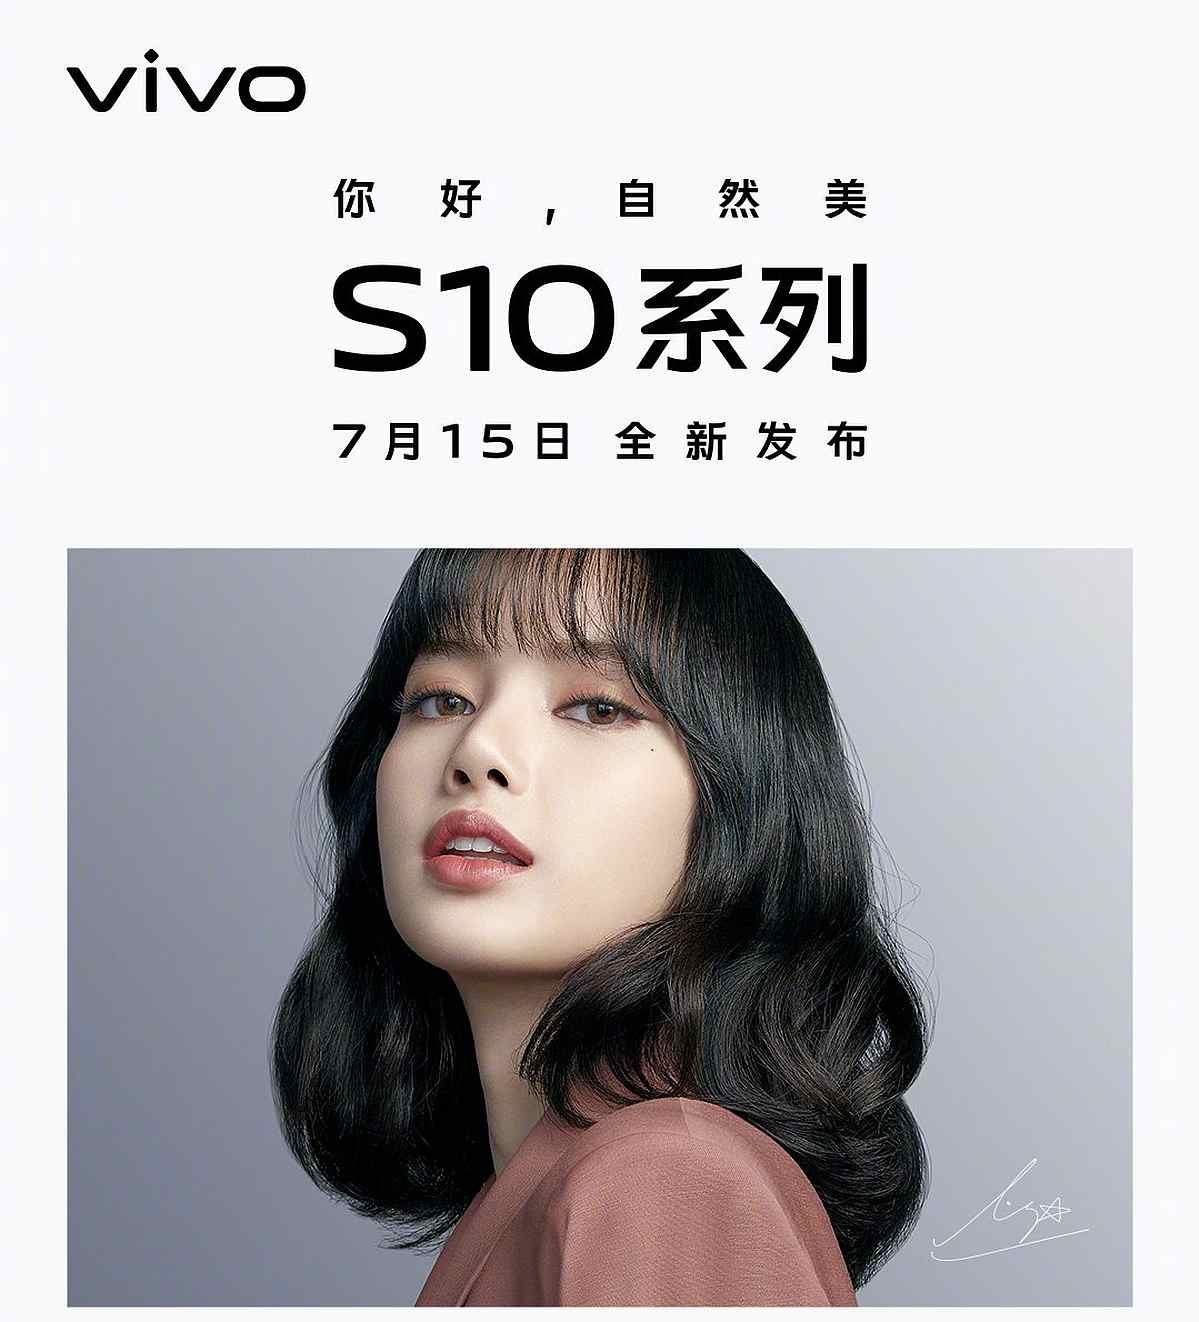 Vivo S10 Pro official poster